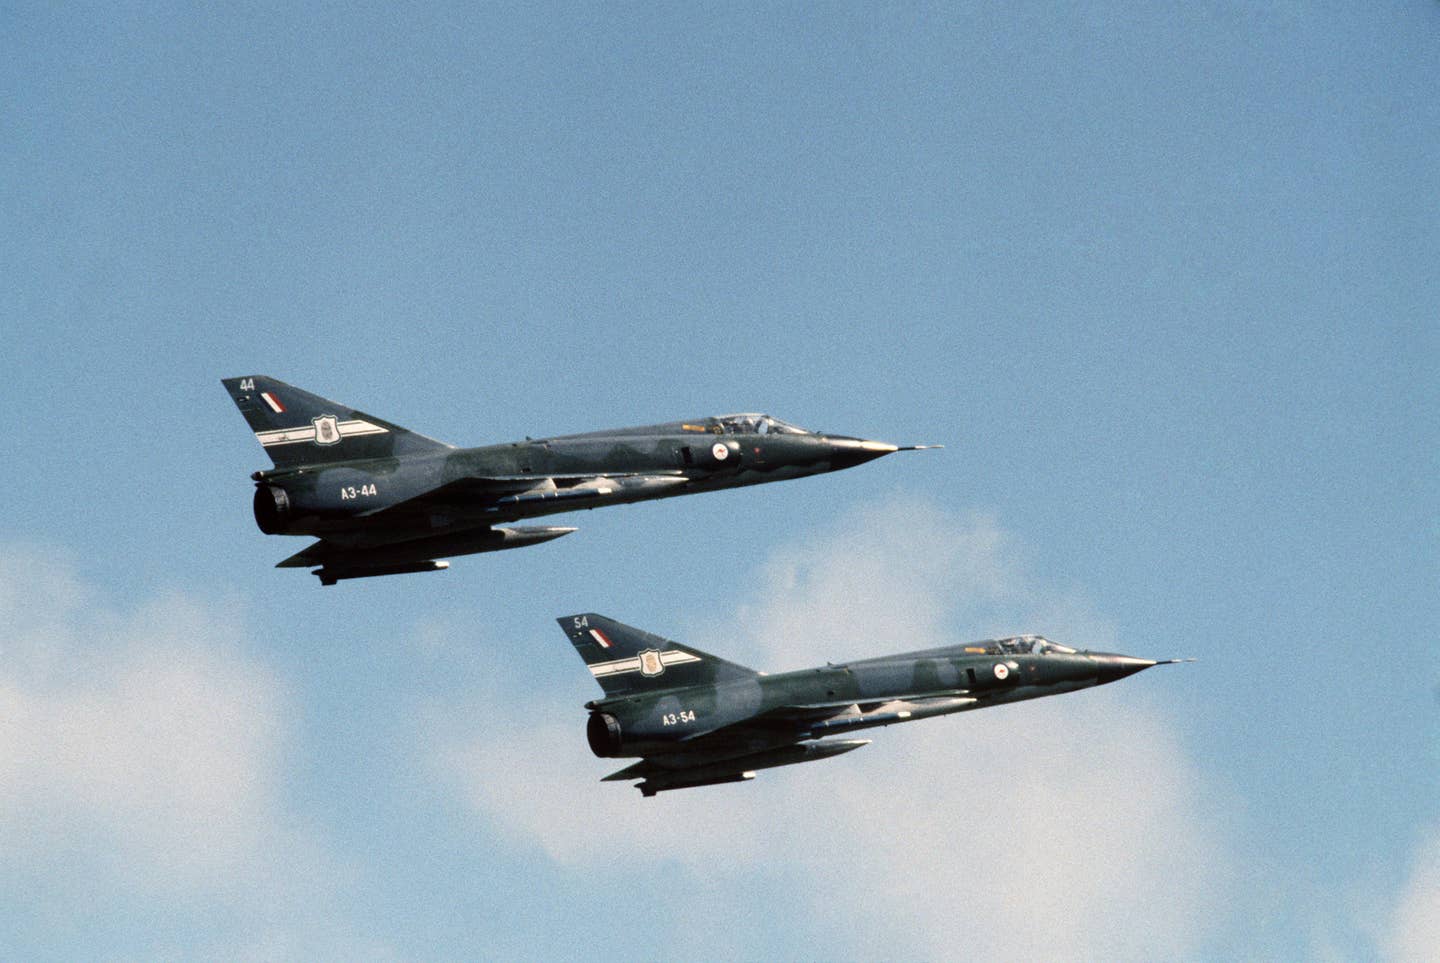 A right-side view of two Mirage III aircraft of the Royal Australian Air Force taking off on a mission during the joint Australian, New Zealand, and US (ANZUS) Exercise TRIAD '84. (USAF photo)